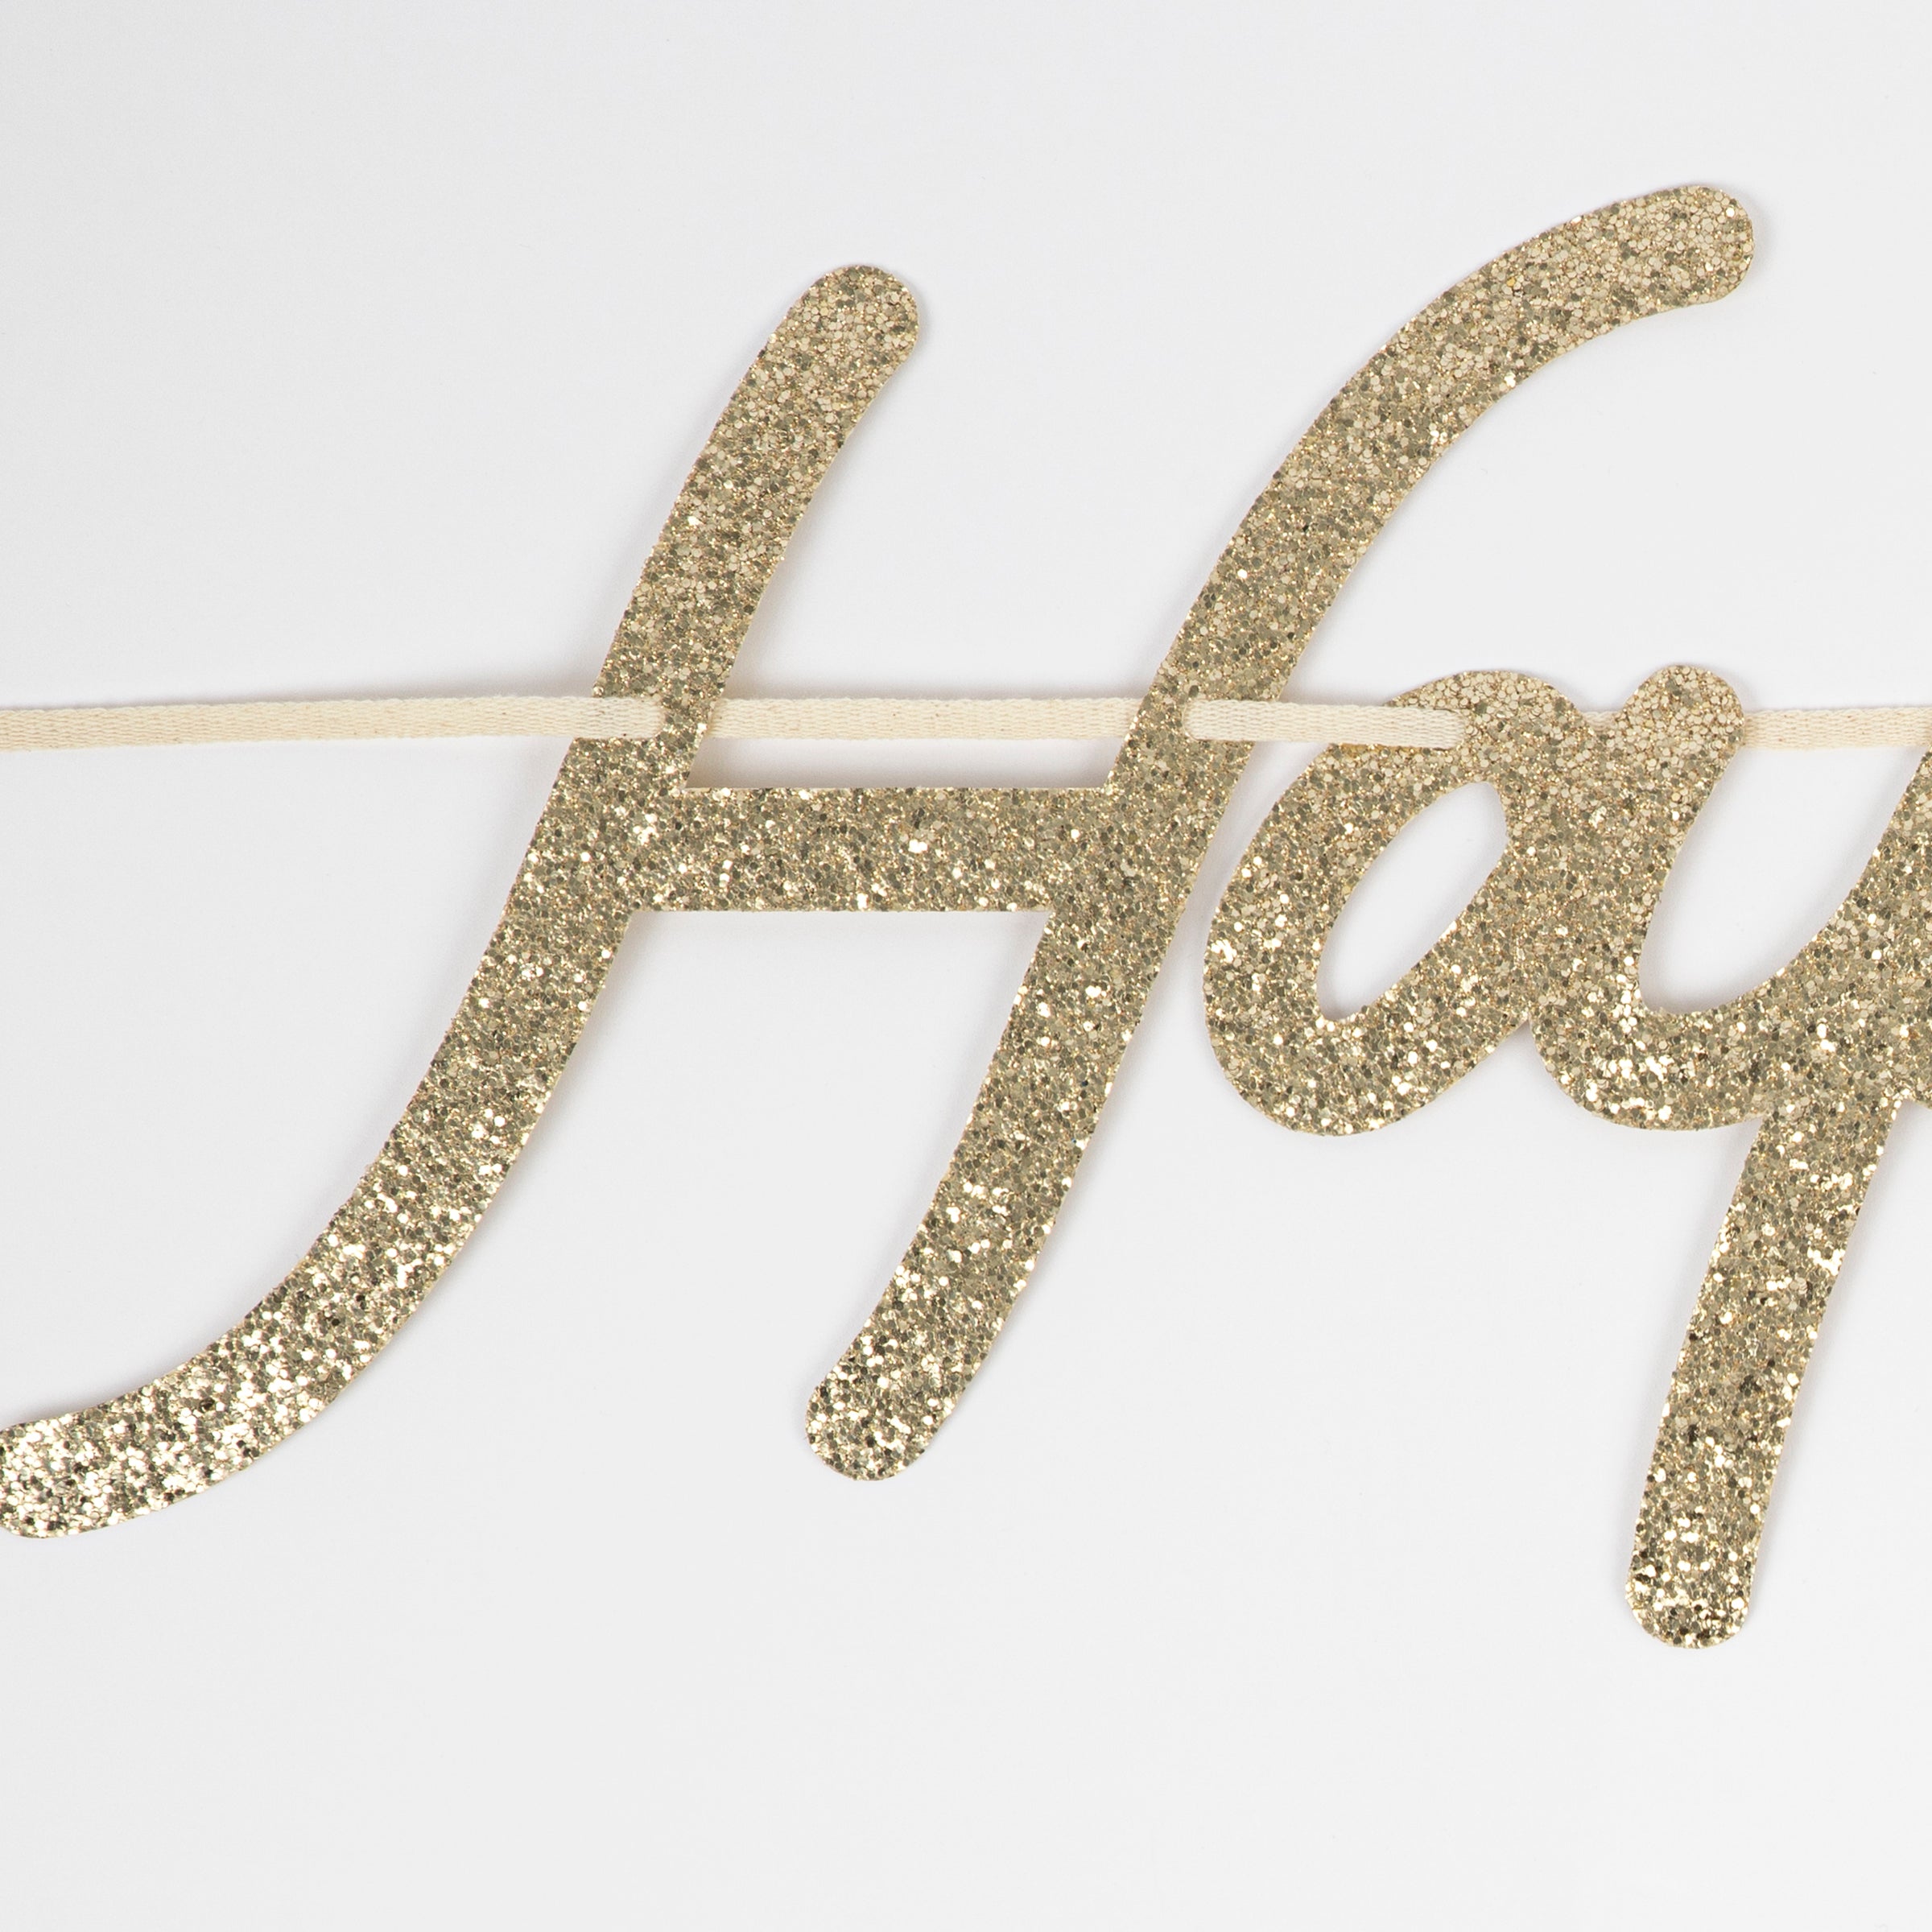 If you're looking for gold happy birthday decorations you'll love our paper garland.